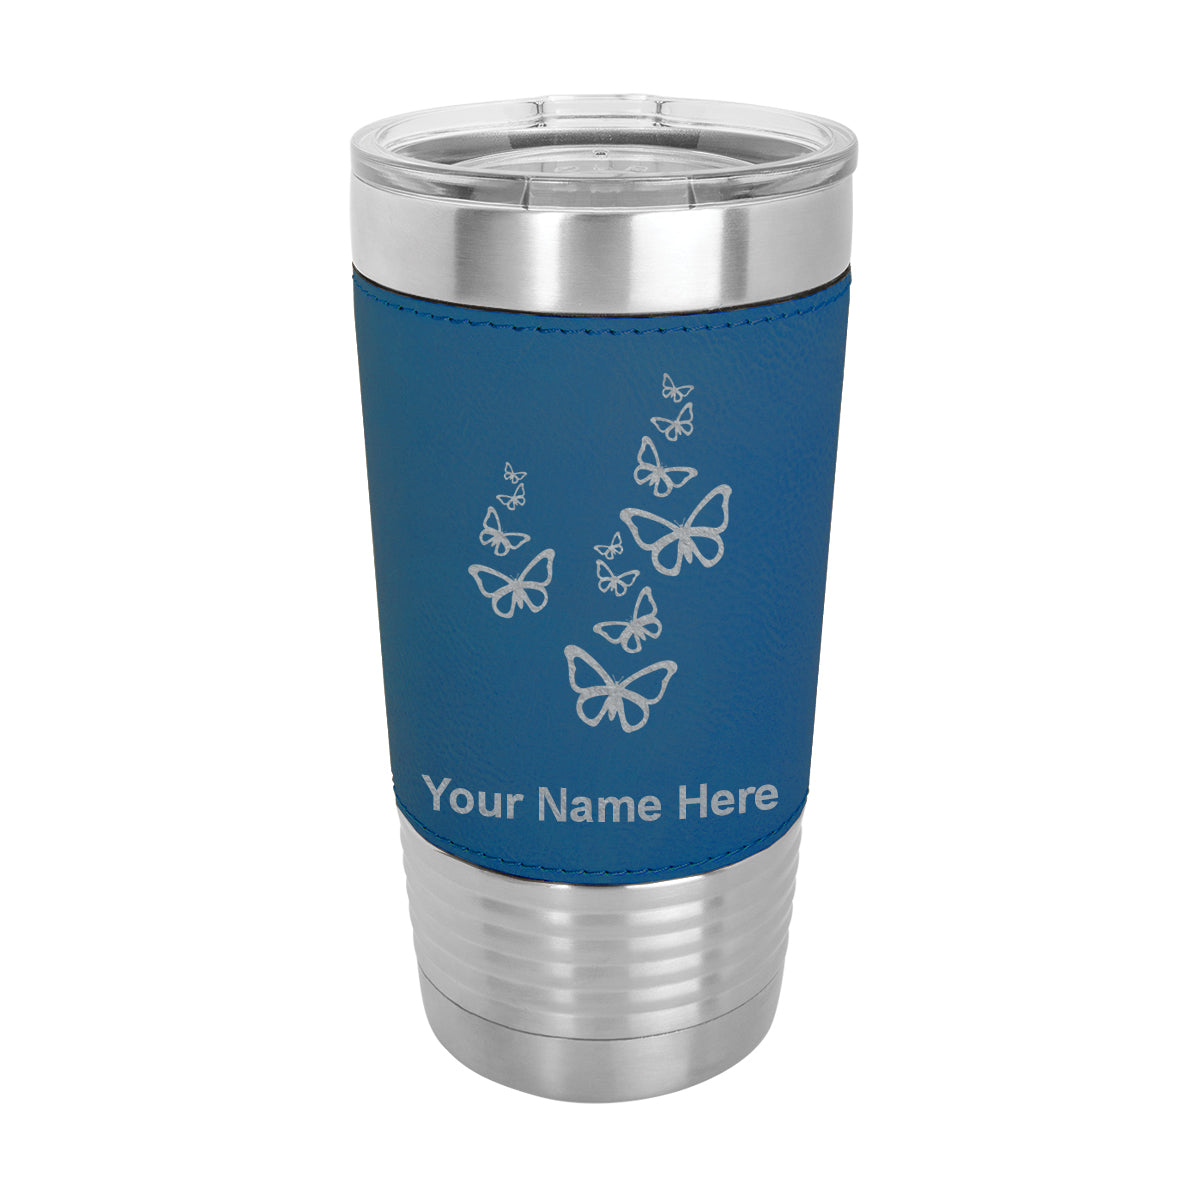 20oz Faux Leather Tumbler Mug, Butterflies, Personalized Engraving Included - LaserGram Custom Engraved Gifts